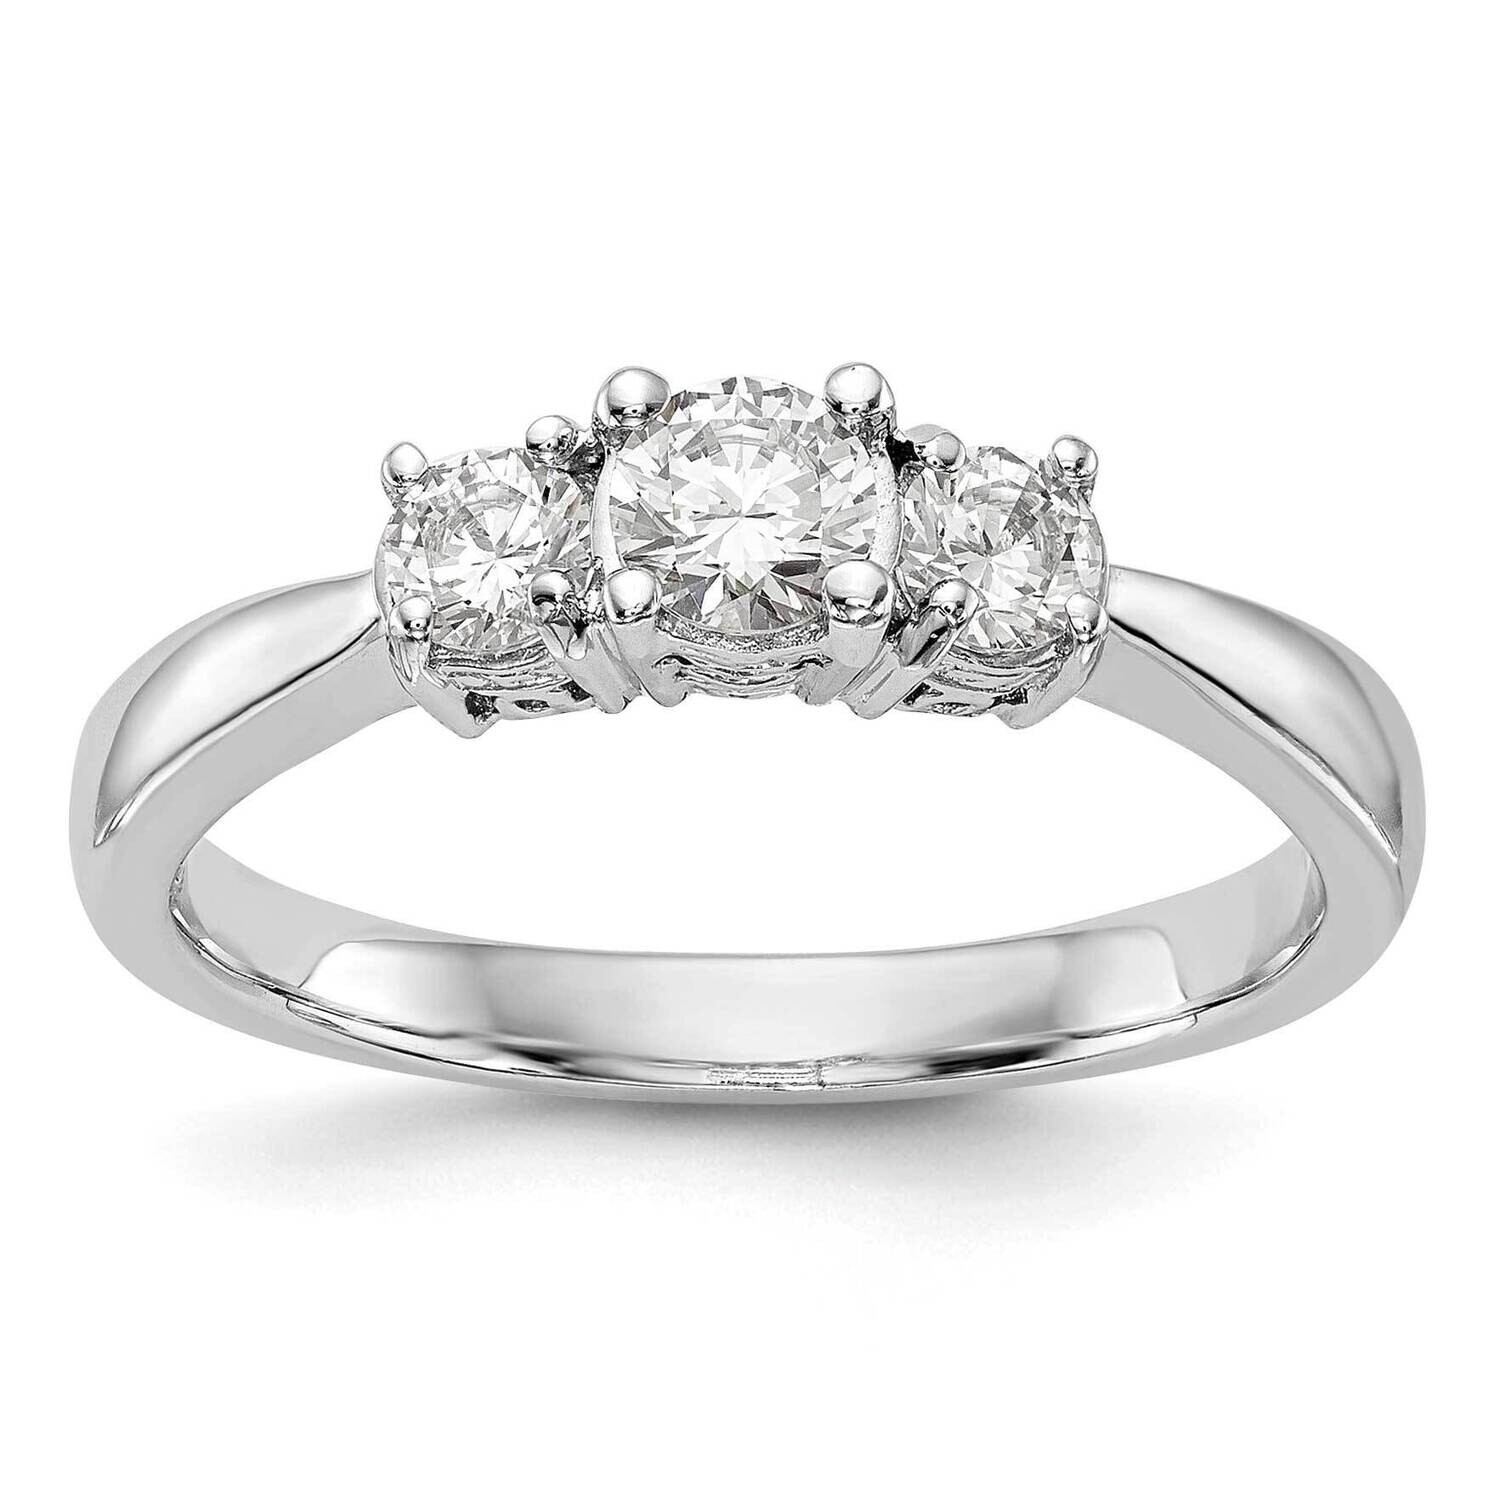 3-Stone Holds 1/3 Carat 4.4mm Round Center 2-3.3mm Round Sides Engagement Ring Mounting 14k White Gold RM2967E-033-CWAA